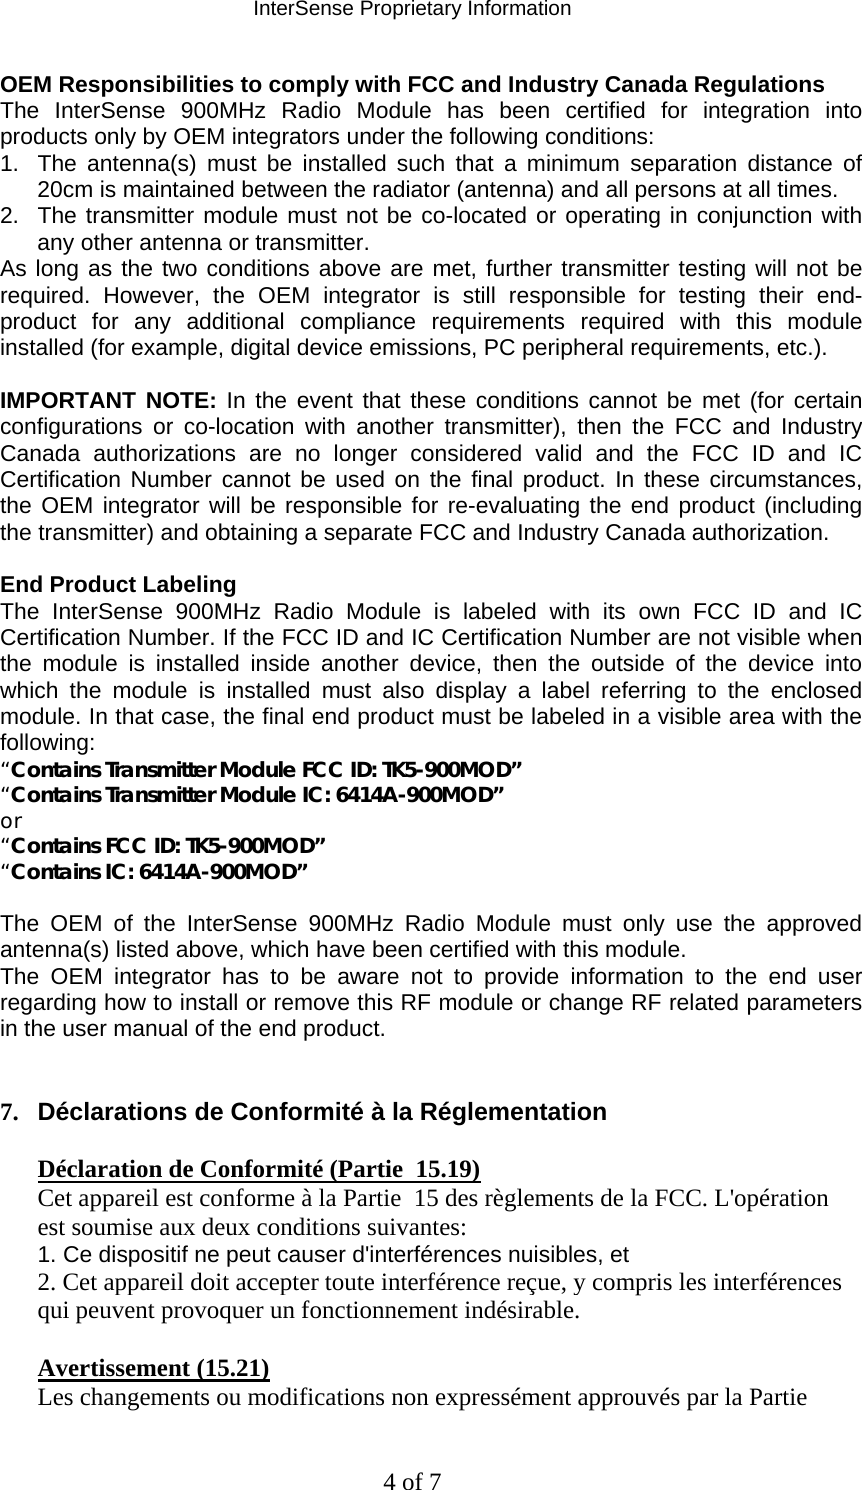 InterSense Proprietary Information 4 of 7 OEM Responsibilities to comply with FCC and Industry Canada Regulations The InterSense 900MHz Radio Module has been certified for integration into products only by OEM integrators under the following conditions: 1.  The antenna(s) must be installed such that a minimum separation distance of 20cm is maintained between the radiator (antenna) and all persons at all times. 2.  The transmitter module must not be co-located or operating in conjunction with any other antenna or transmitter. As long as the two conditions above are met, further transmitter testing will not be required. However, the OEM integrator is still responsible for testing their end-product for any additional compliance requirements required with this module installed (for example, digital device emissions, PC peripheral requirements, etc.).  IMPORTANT NOTE: In the event that these conditions cannot be met (for certain configurations or co-location with another transmitter), then the FCC and Industry Canada authorizations are no longer considered valid and the FCC ID and IC Certification Number cannot be used on the final product. In these circumstances, the OEM integrator will be responsible for re-evaluating the end product (including the transmitter) and obtaining a separate FCC and Industry Canada authorization.  End Product Labeling The InterSense 900MHz Radio Module is labeled with its own FCC ID and IC Certification Number. If the FCC ID and IC Certification Number are not visible when the module is installed inside another device, then the outside of the device into which the module is installed must also display a label referring to the enclosed module. In that case, the final end product must be labeled in a visible area with the following: “Contains Transmitter Module FCC ID: TK5-900MOD” “Contains Transmitter Module IC: 6414A-900MOD” or “Contains FCC ID: TK5-900MOD” “Contains IC: 6414A-900MOD”  The OEM of the InterSense 900MHz Radio Module must only use the approved antenna(s) listed above, which have been certified with this module. The OEM integrator has to be aware not to provide information to the end user regarding how to install or remove this RF module or change RF related parameters in the user manual of the end product.   7.  Déclarations de Conformité à la Réglementation   Déclaration de Conformité (Partie  15.19)  Cet appareil est conforme à la Partie  15 des règlements de la FCC. L&apos;opération est soumise aux deux conditions suivantes:  1. Ce dispositif ne peut causer d&apos;interférences nuisibles, et  2. Cet appareil doit accepter toute interférence reçue, y compris les interférences qui peuvent provoquer un fonctionnement indésirable.   Avertissement (15.21)  Les changements ou modifications non expressément approuvés par la Partie  